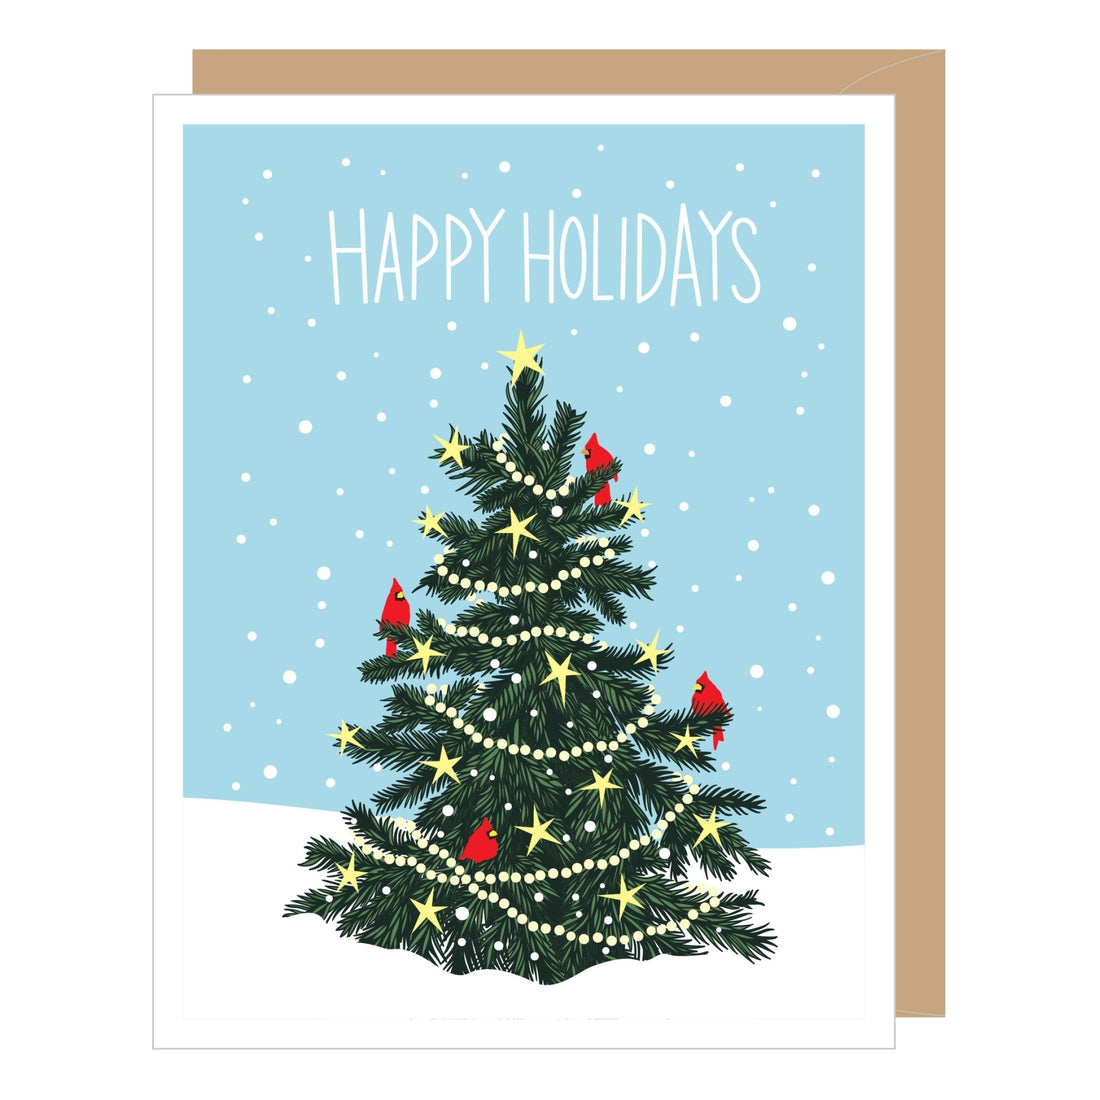 Card - Holiday - Tree in Snow